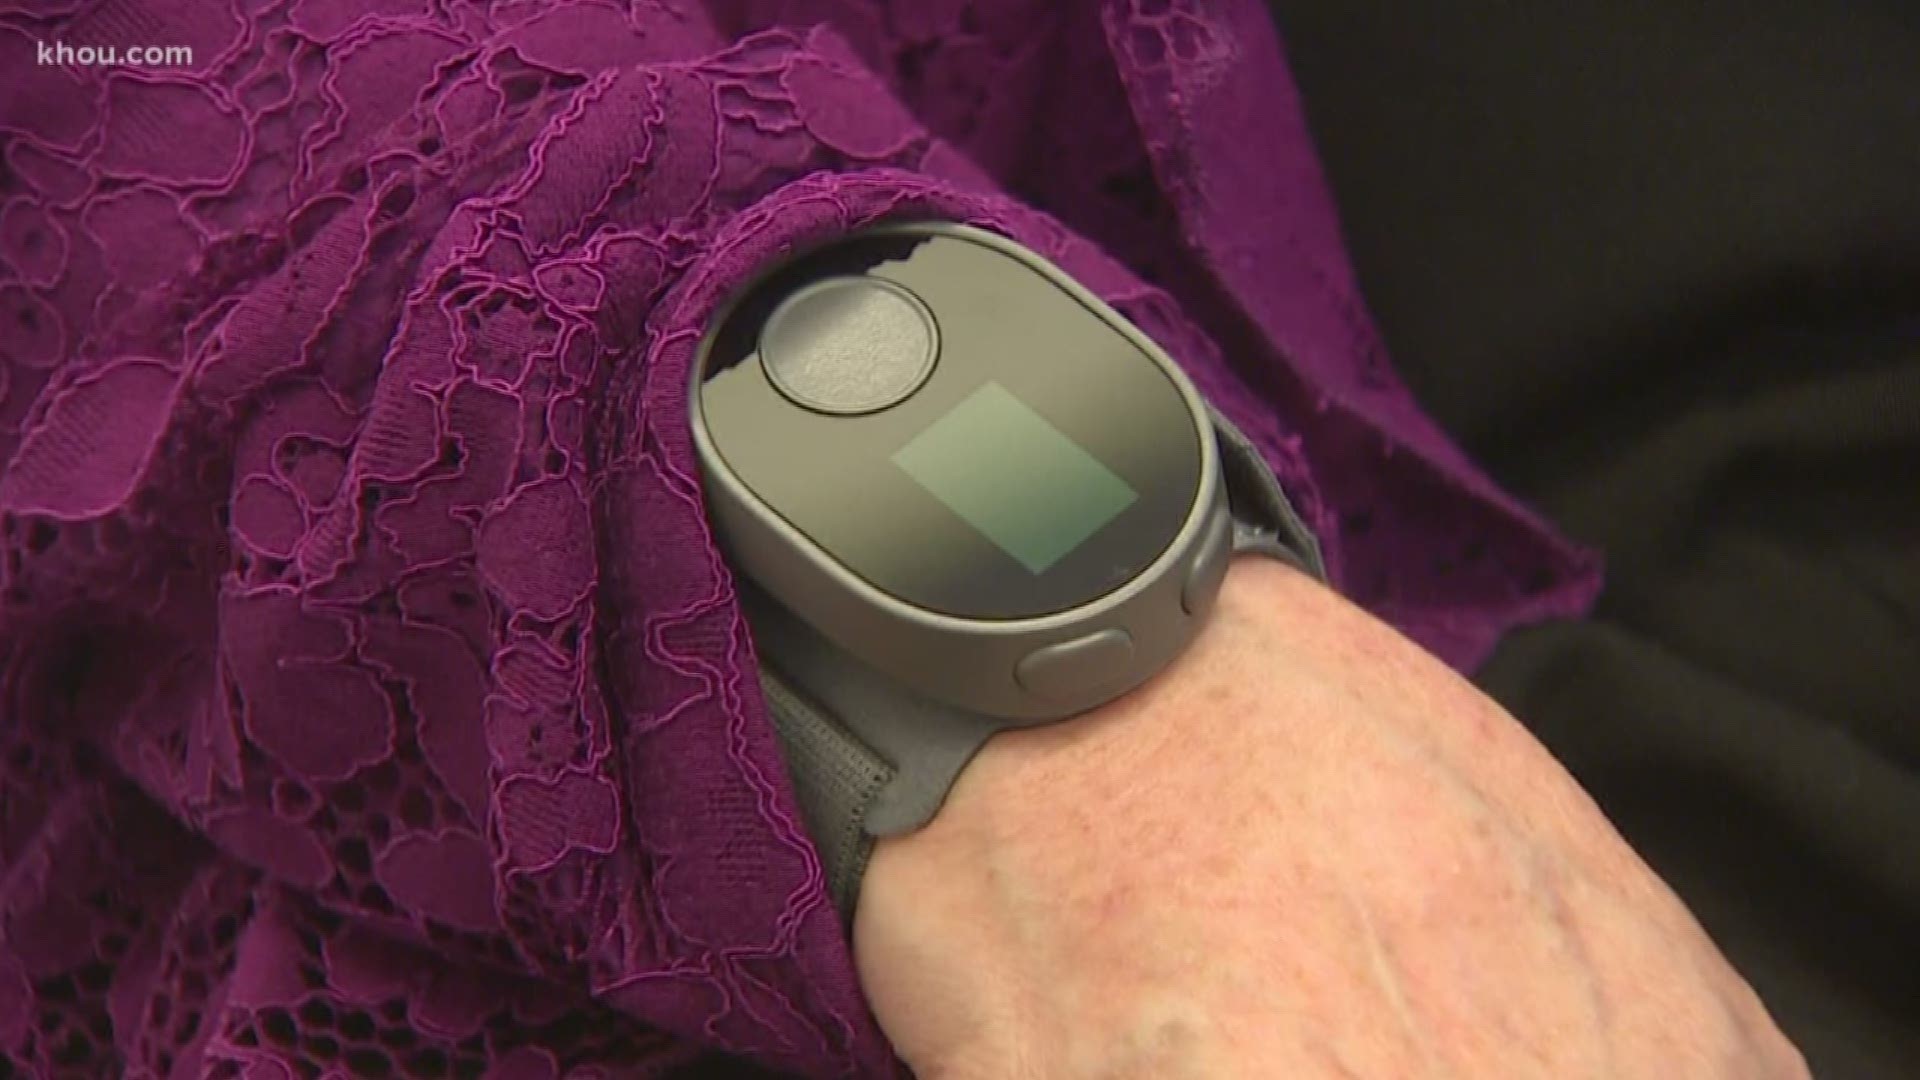 The device looks like a smartwatch but helps people who deal with tremors.